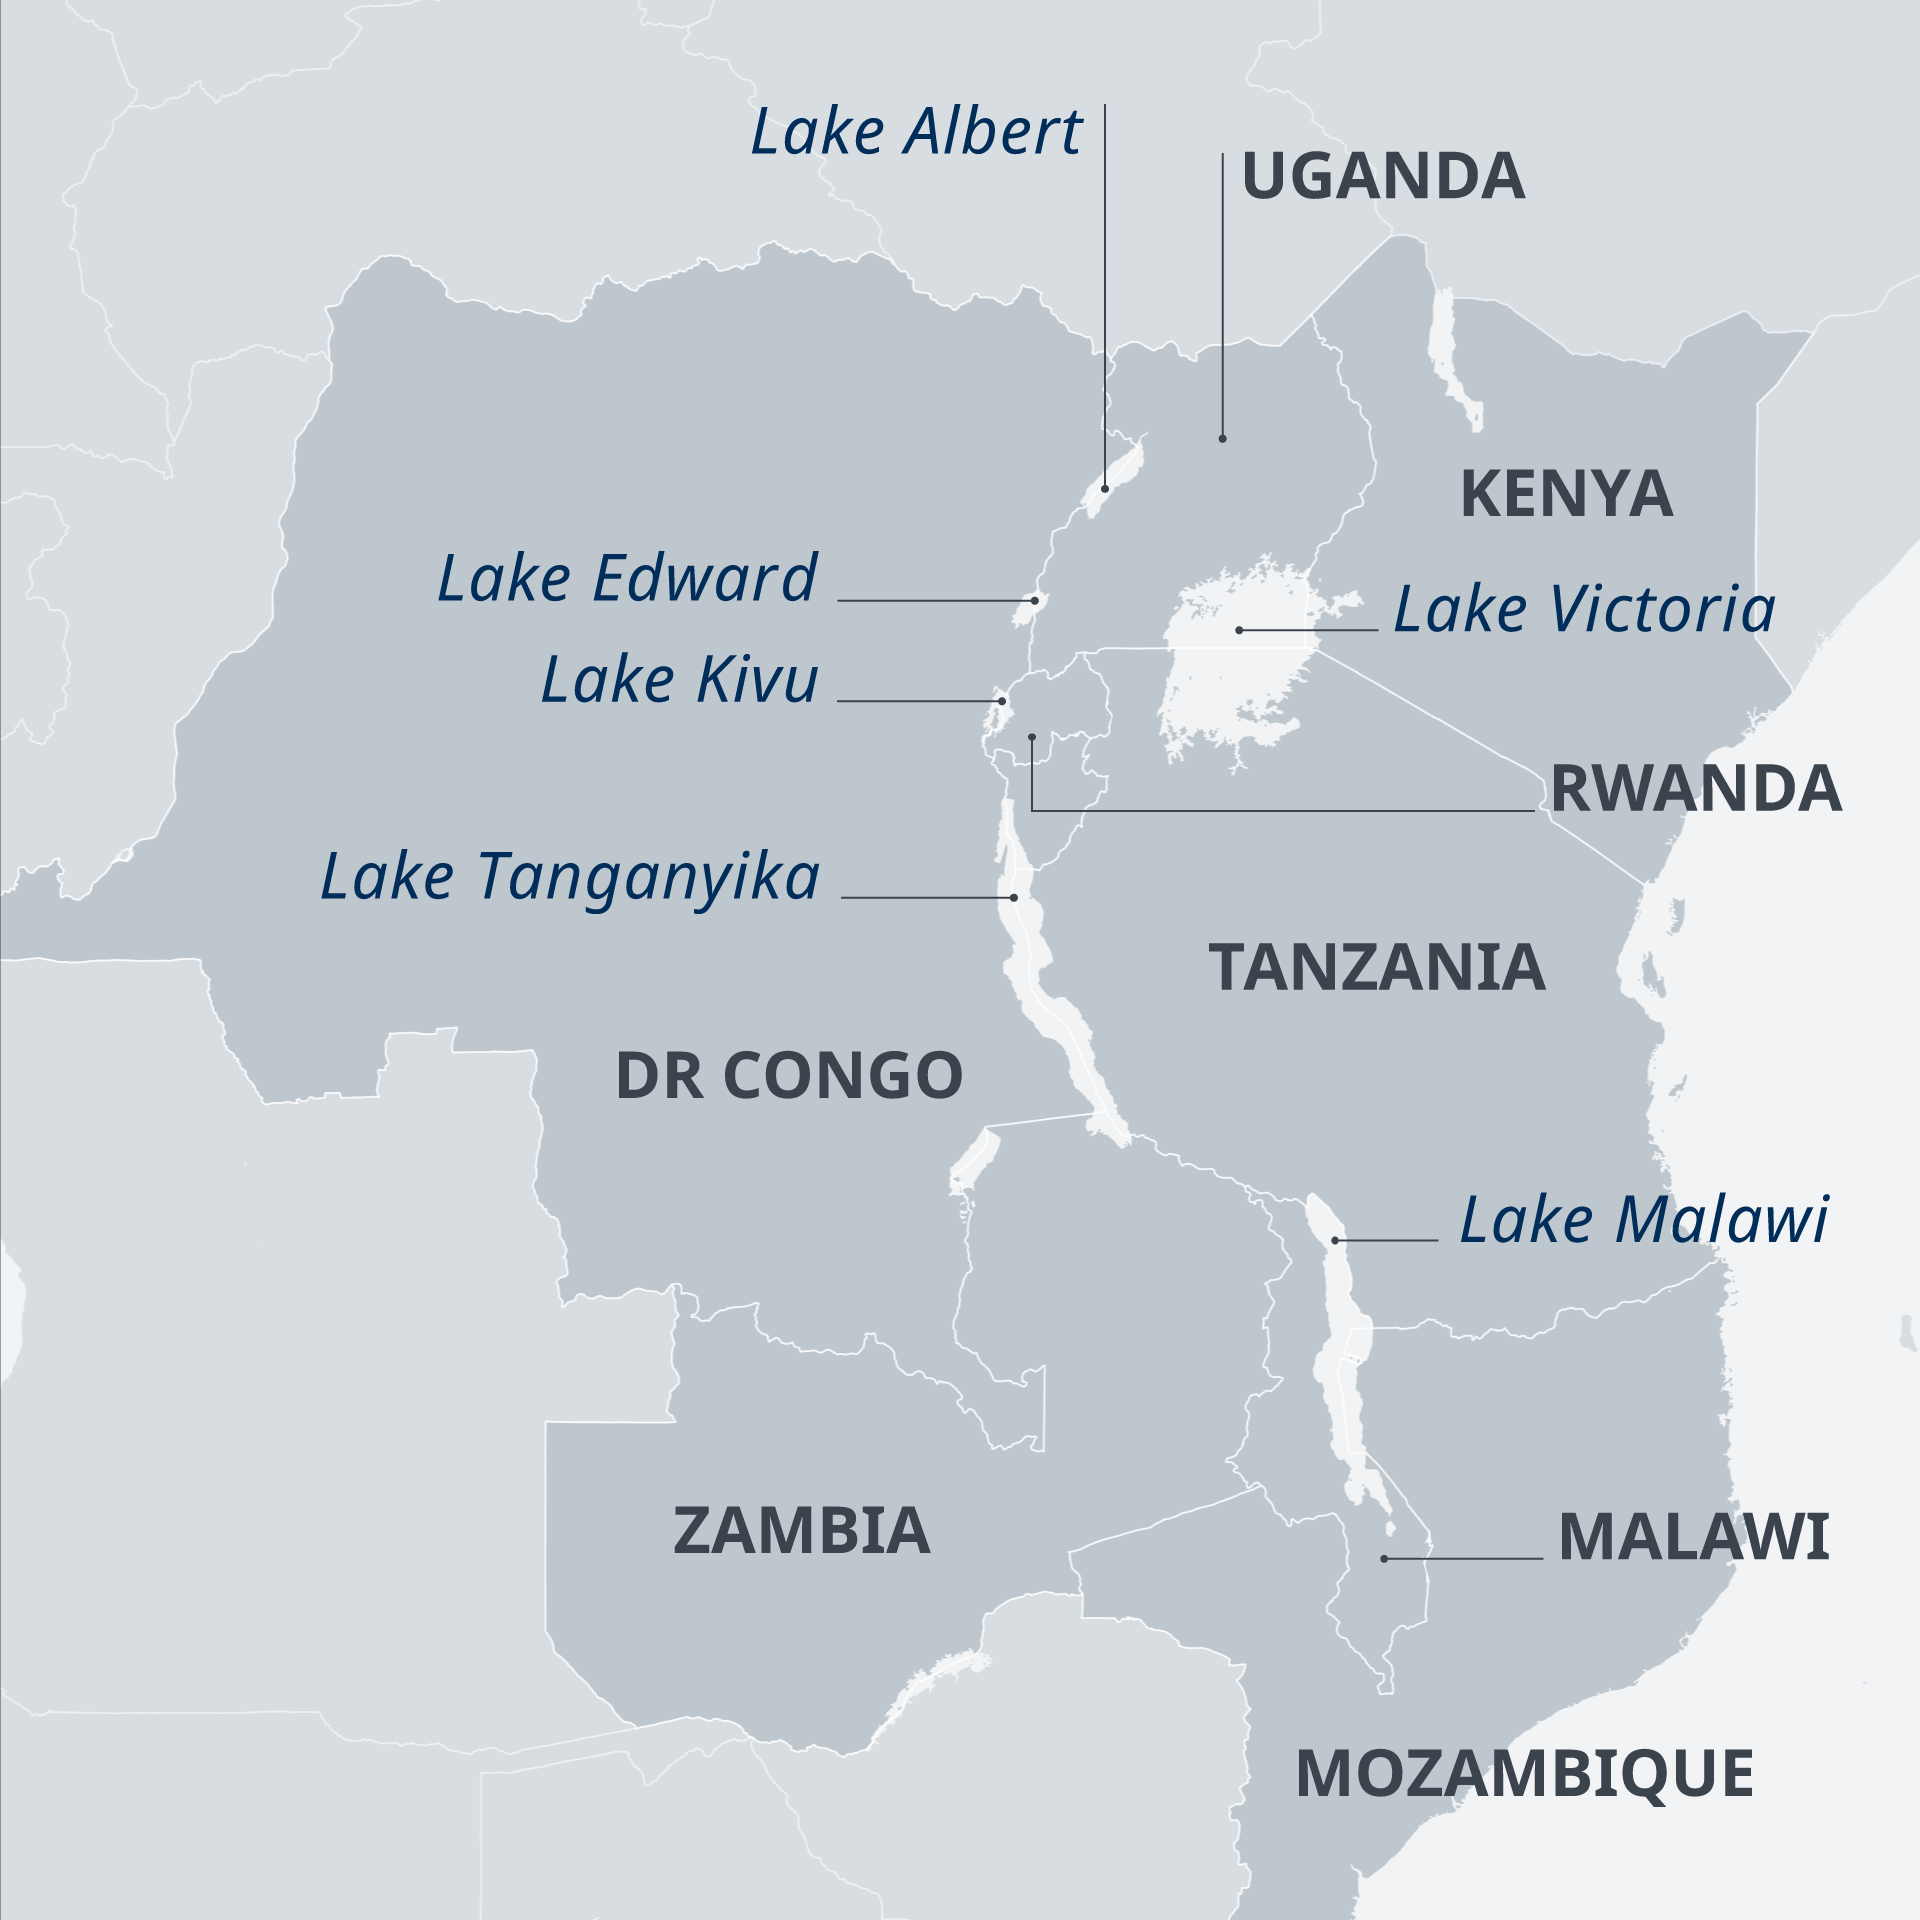 A map showing the lakes and borders in East Africa